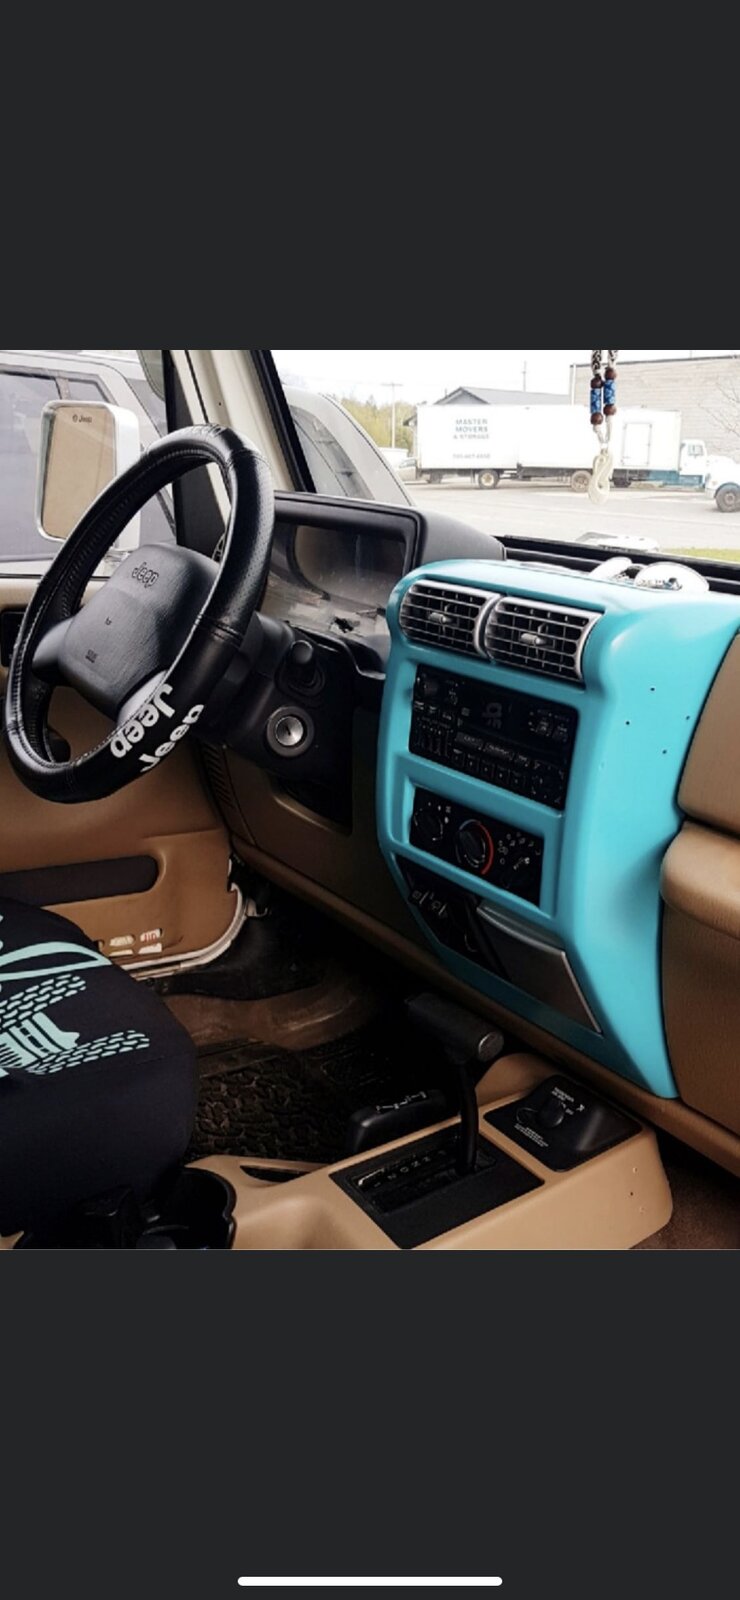 Looking for a SEM Paint match to this interior